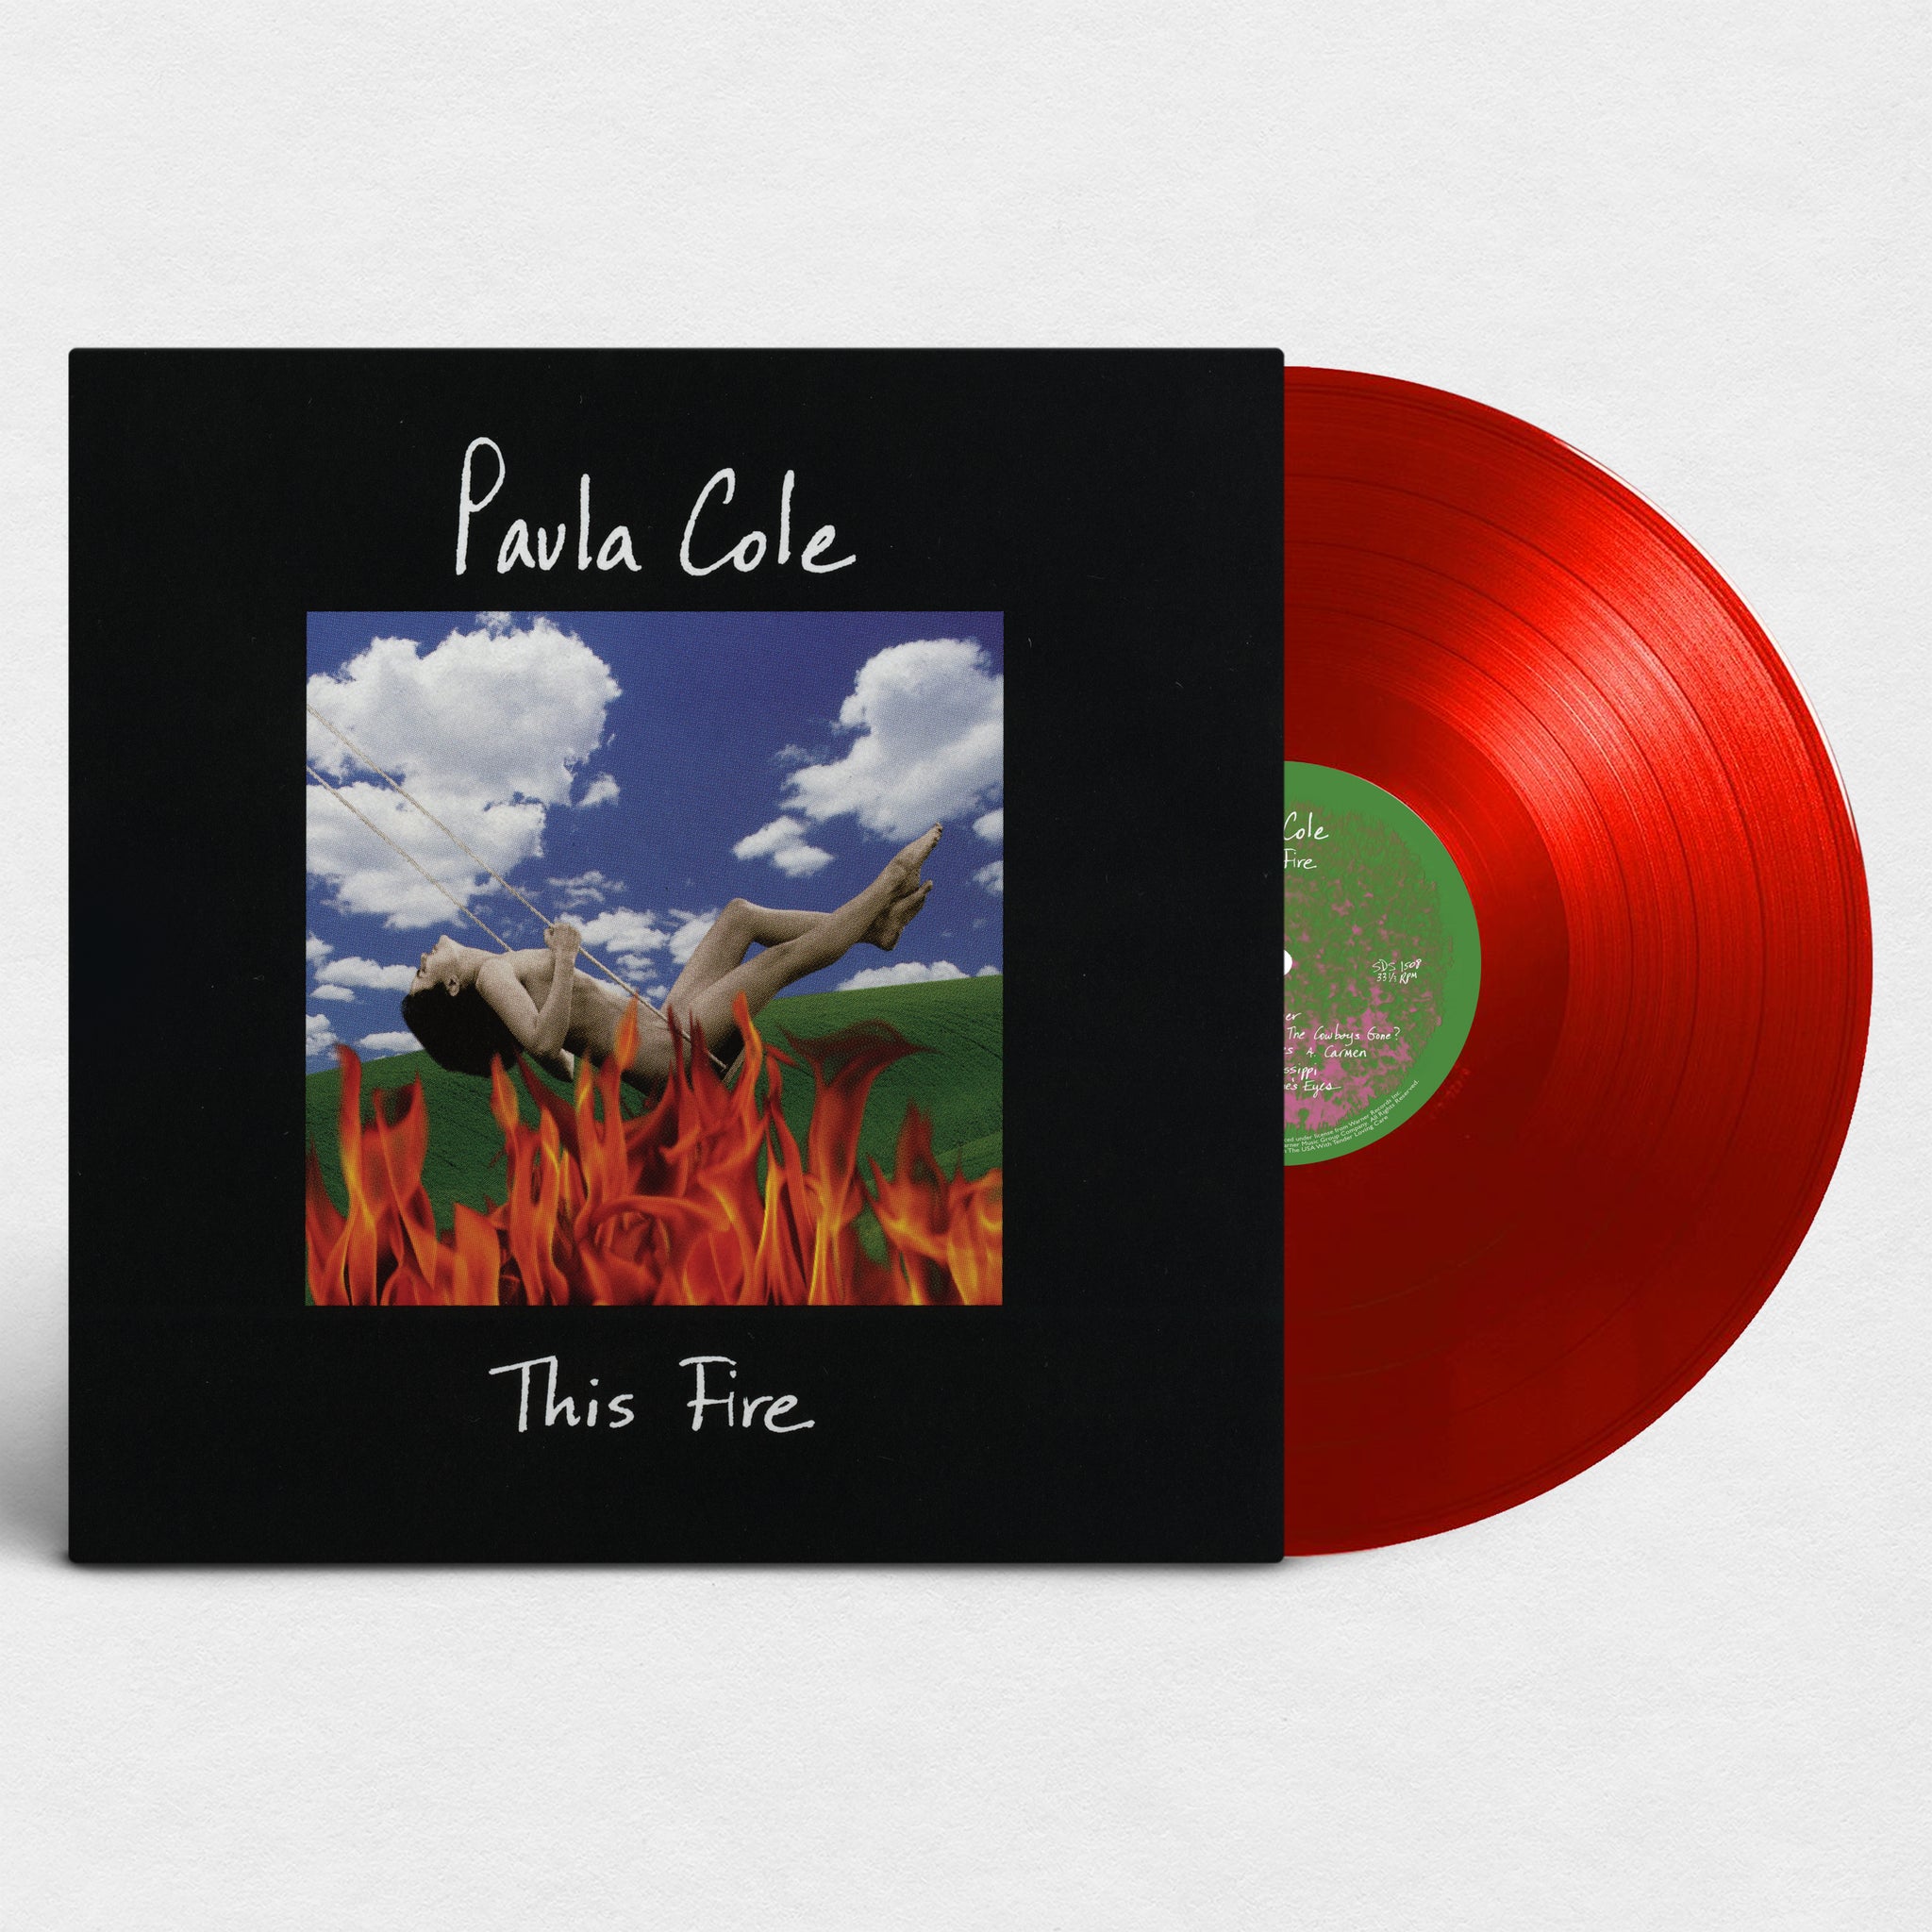 Paula Cole "This Fire" - SDS Exclusive Translucent Red Vinyl Now Shipping